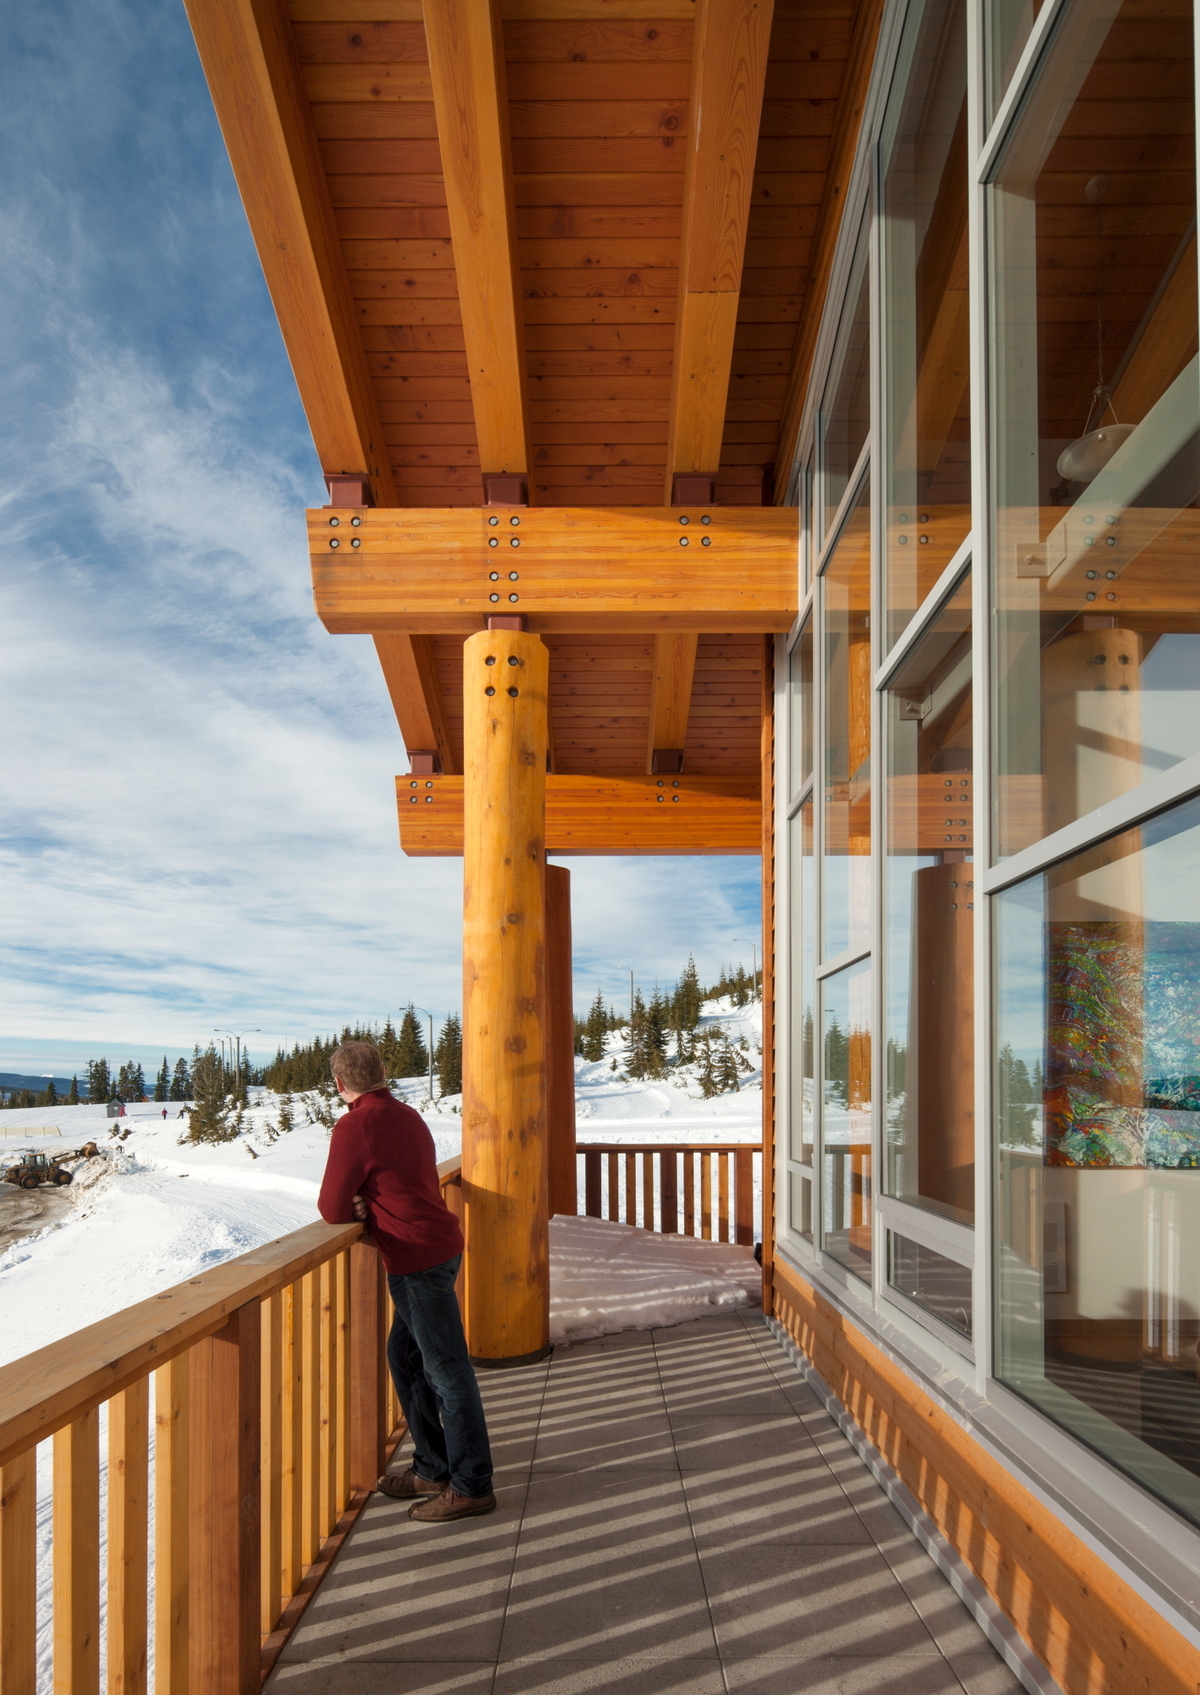 glue-laminated timber (Glulam) beams, wood siding & soffit, solid-sawn heavy timber vertical pole columns, dimensional lumber banister & railing are all shown in this snowy sunny daytime image of the Vancouver Island Mountain Centre occupied external balcony